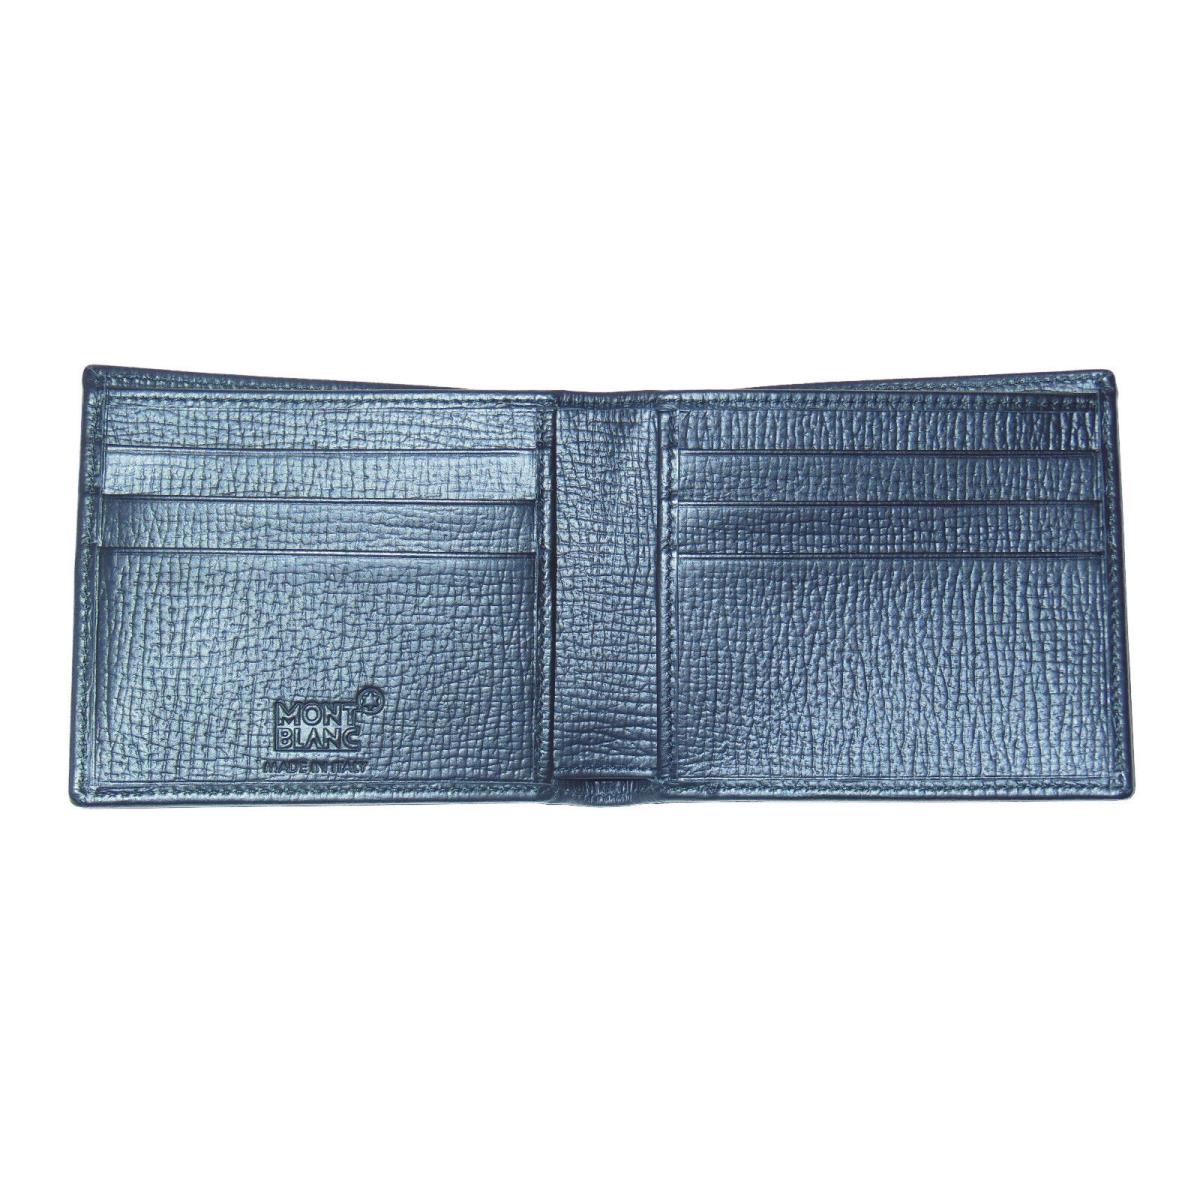 Montblanc Meisterstuck Selection Black Textured 6CC Leather Wallet 114899